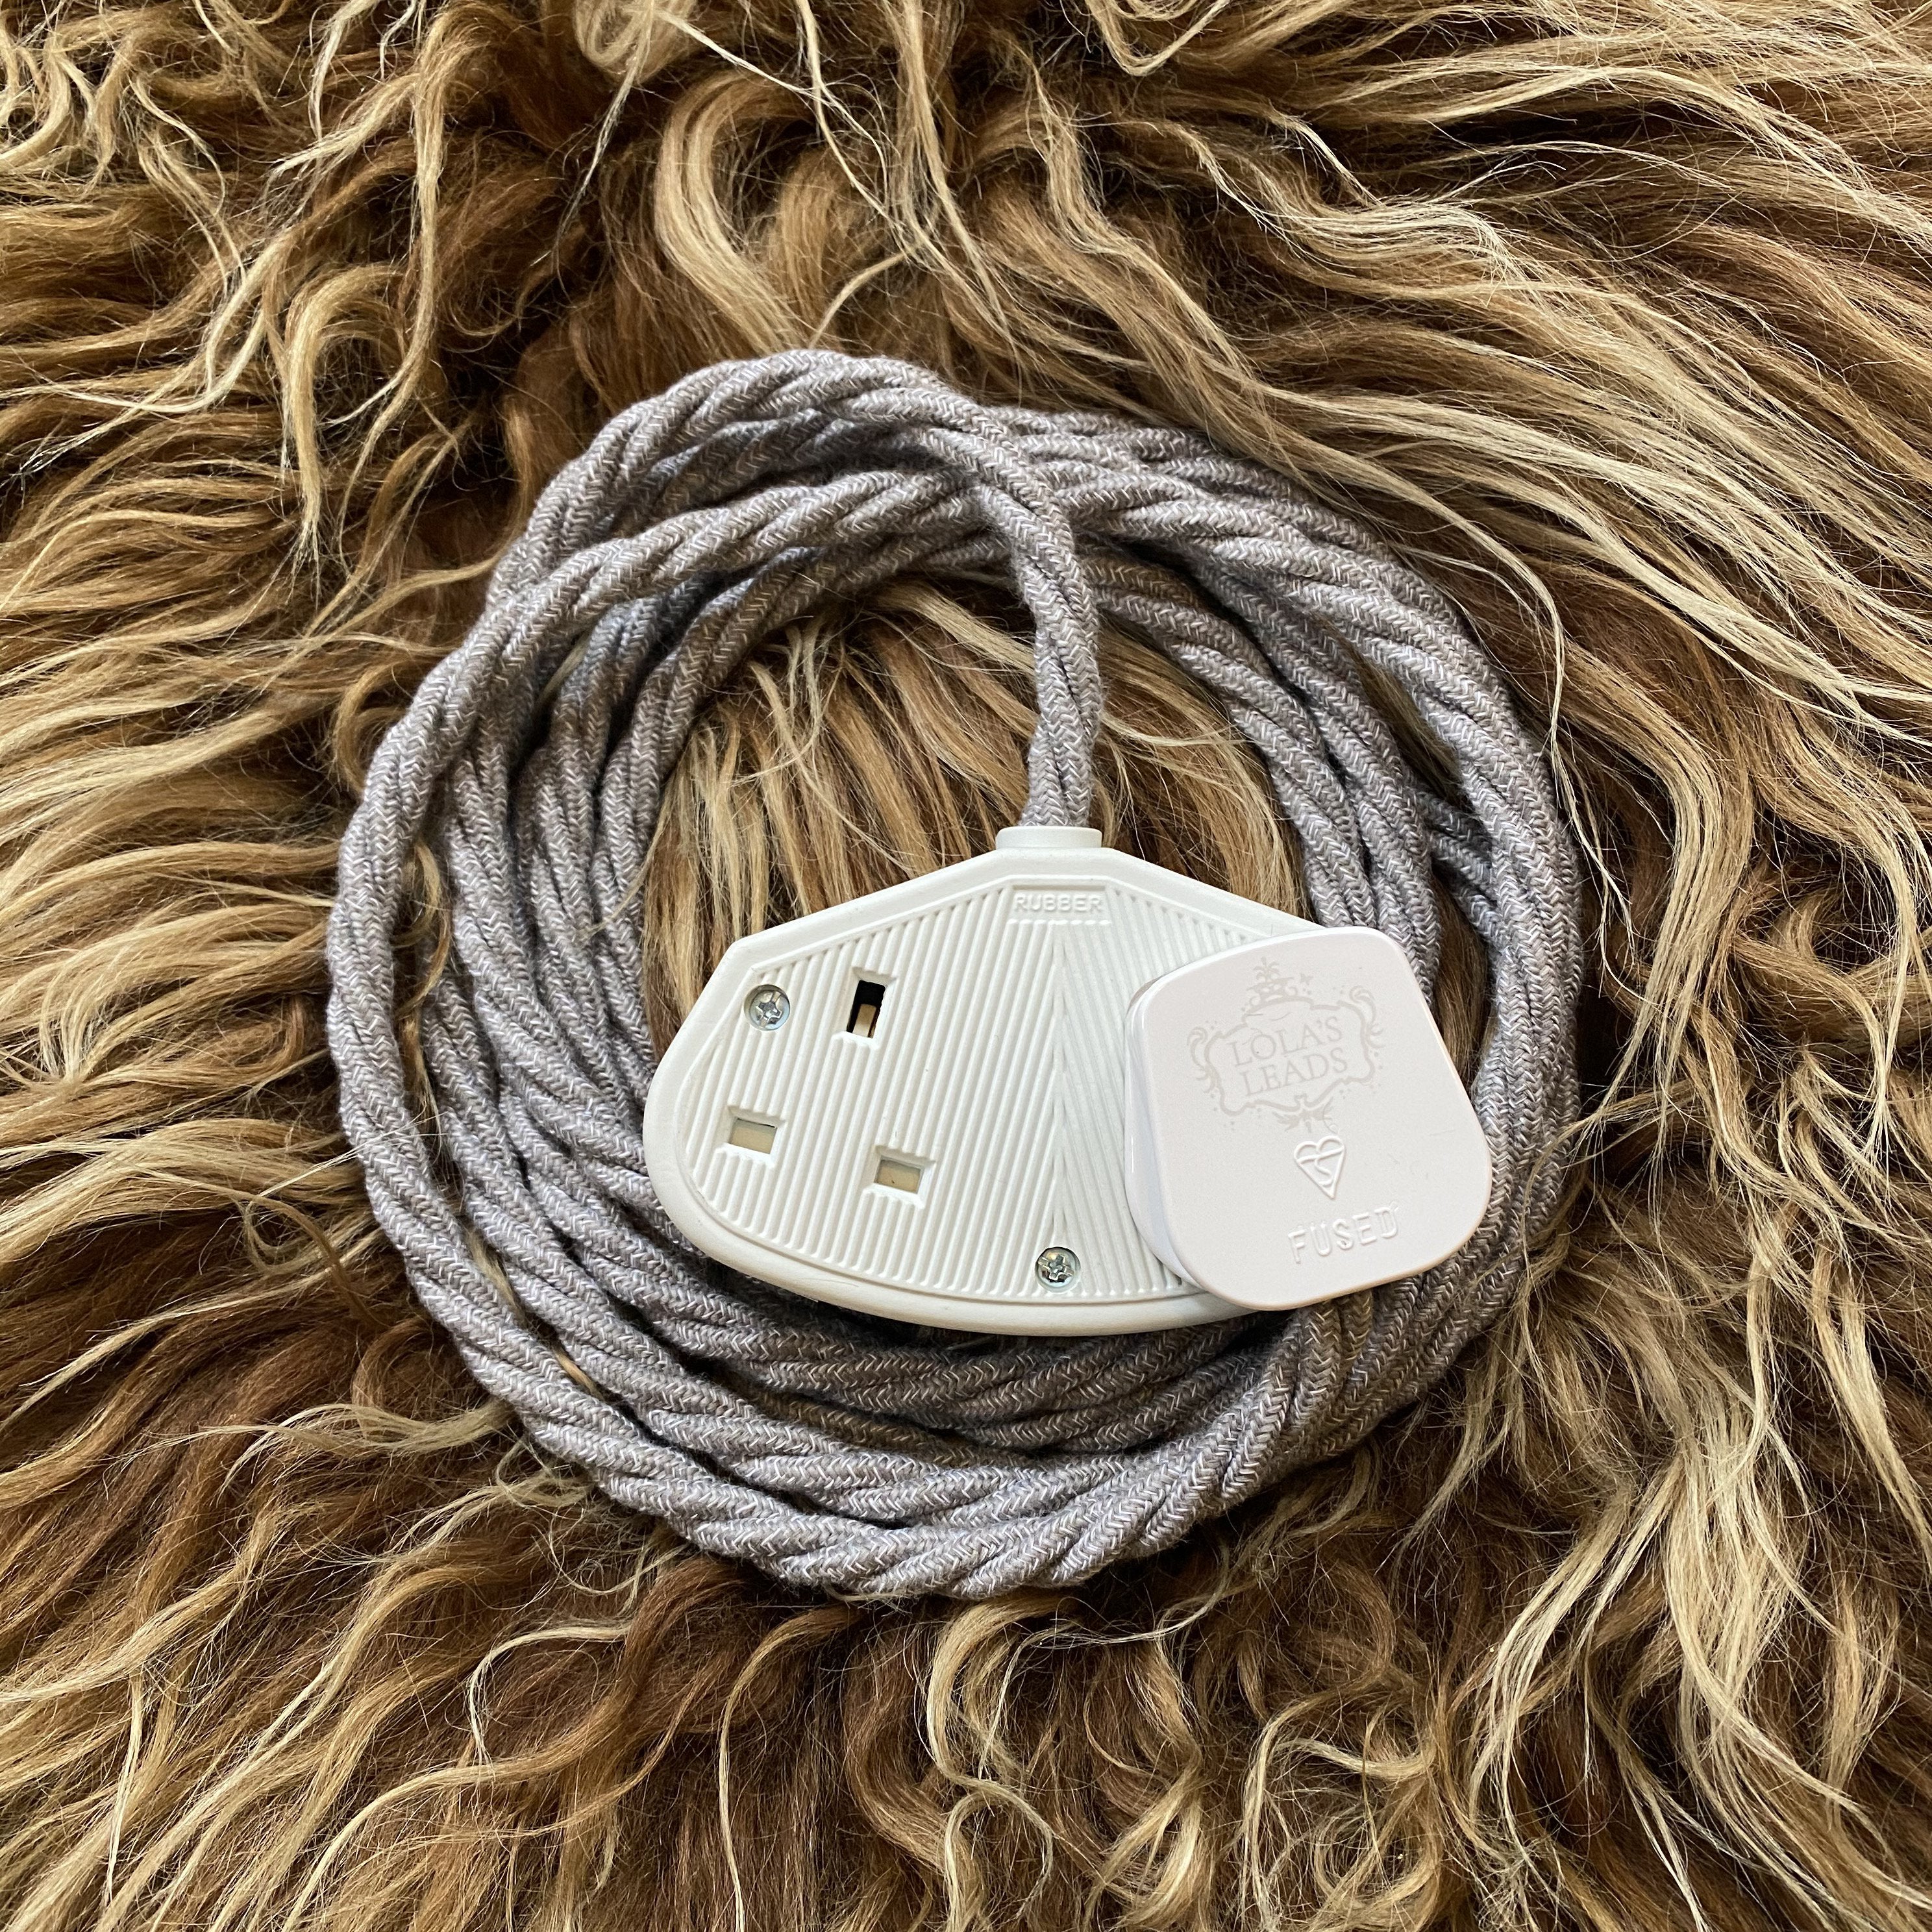 Lola's Leads Ash Grey Linen Fabric Covered Extension Lead